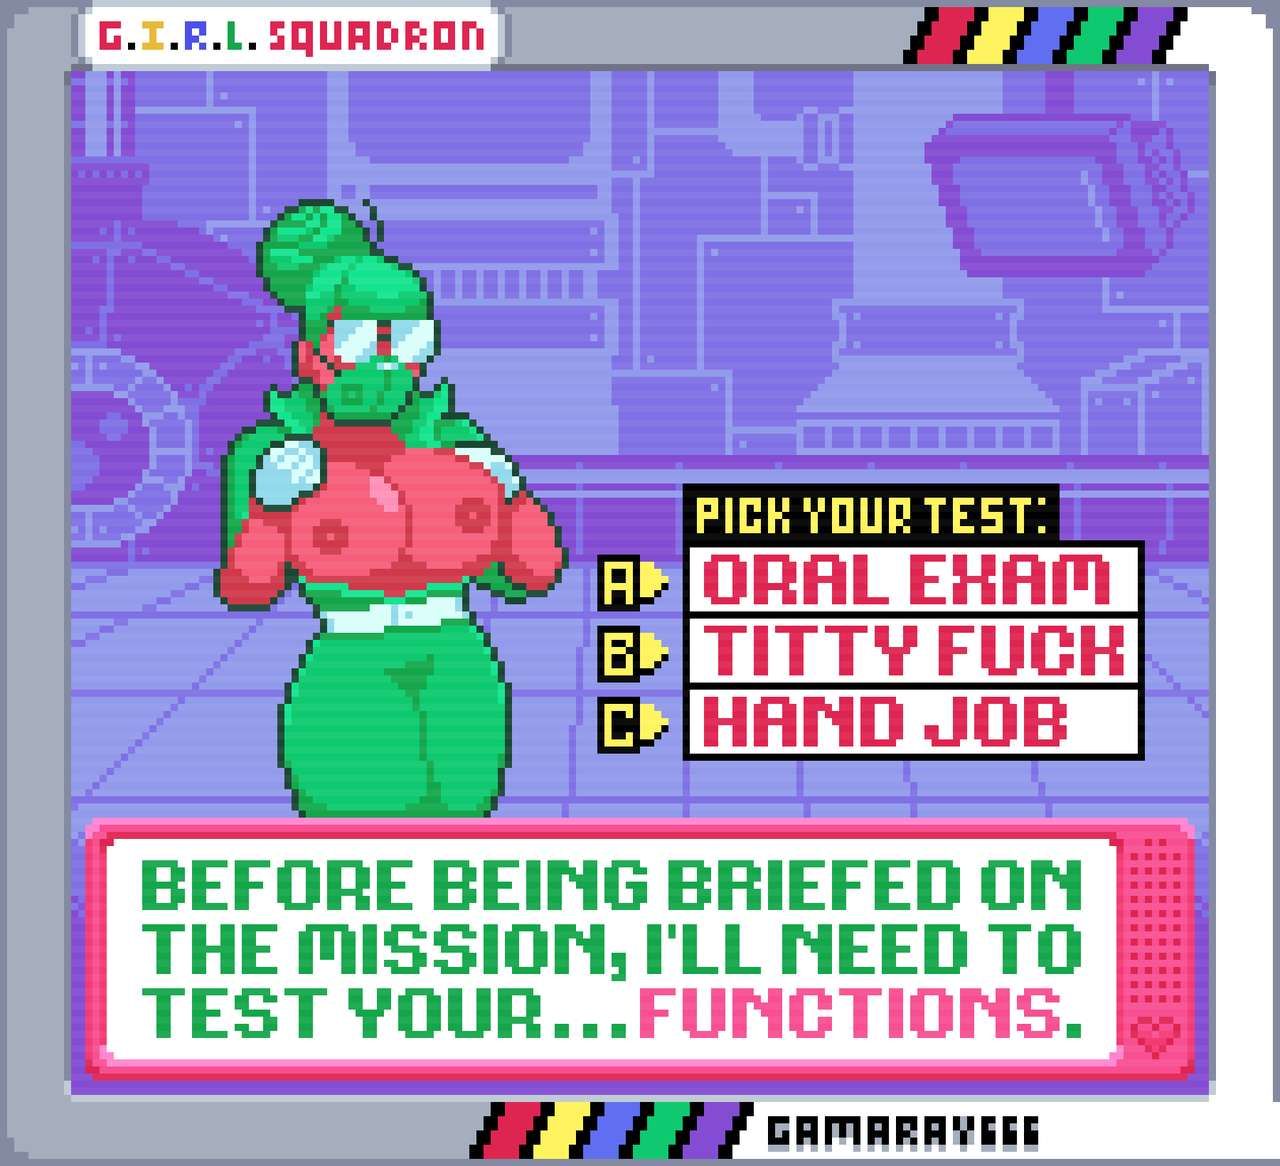 G. I. R. L. SQUADRON - A Choose Your Own Adventure 4